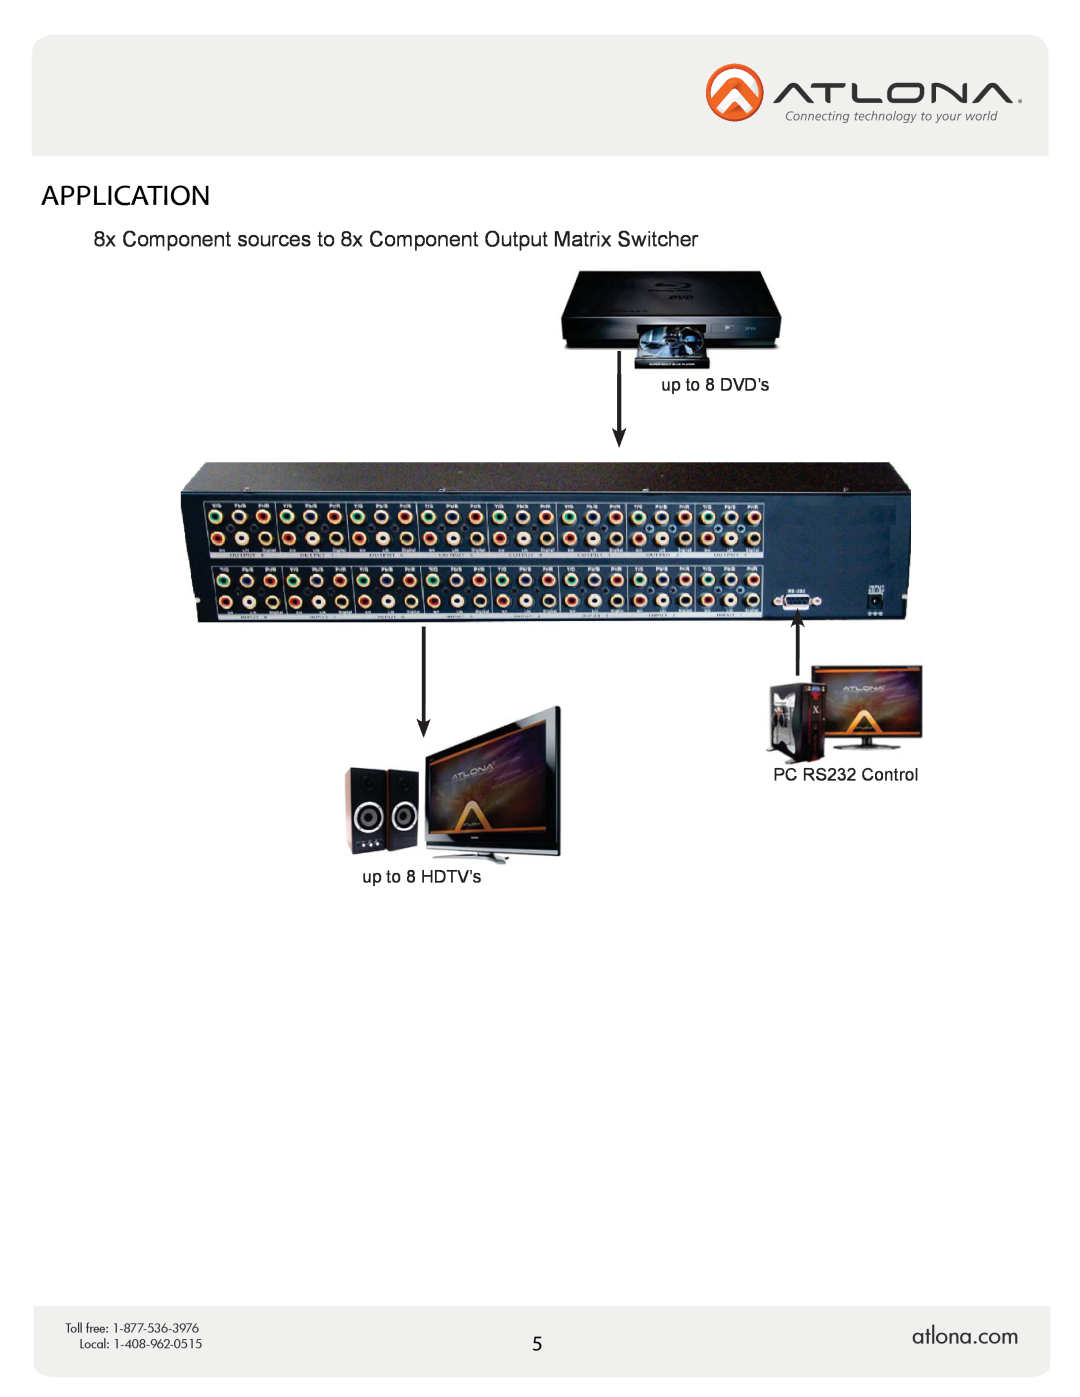 Atlona AT-COMP-88M Application, atlona.com, 8x Component sources to 8x Component Output Matrix Switcher, Toll free, Local 